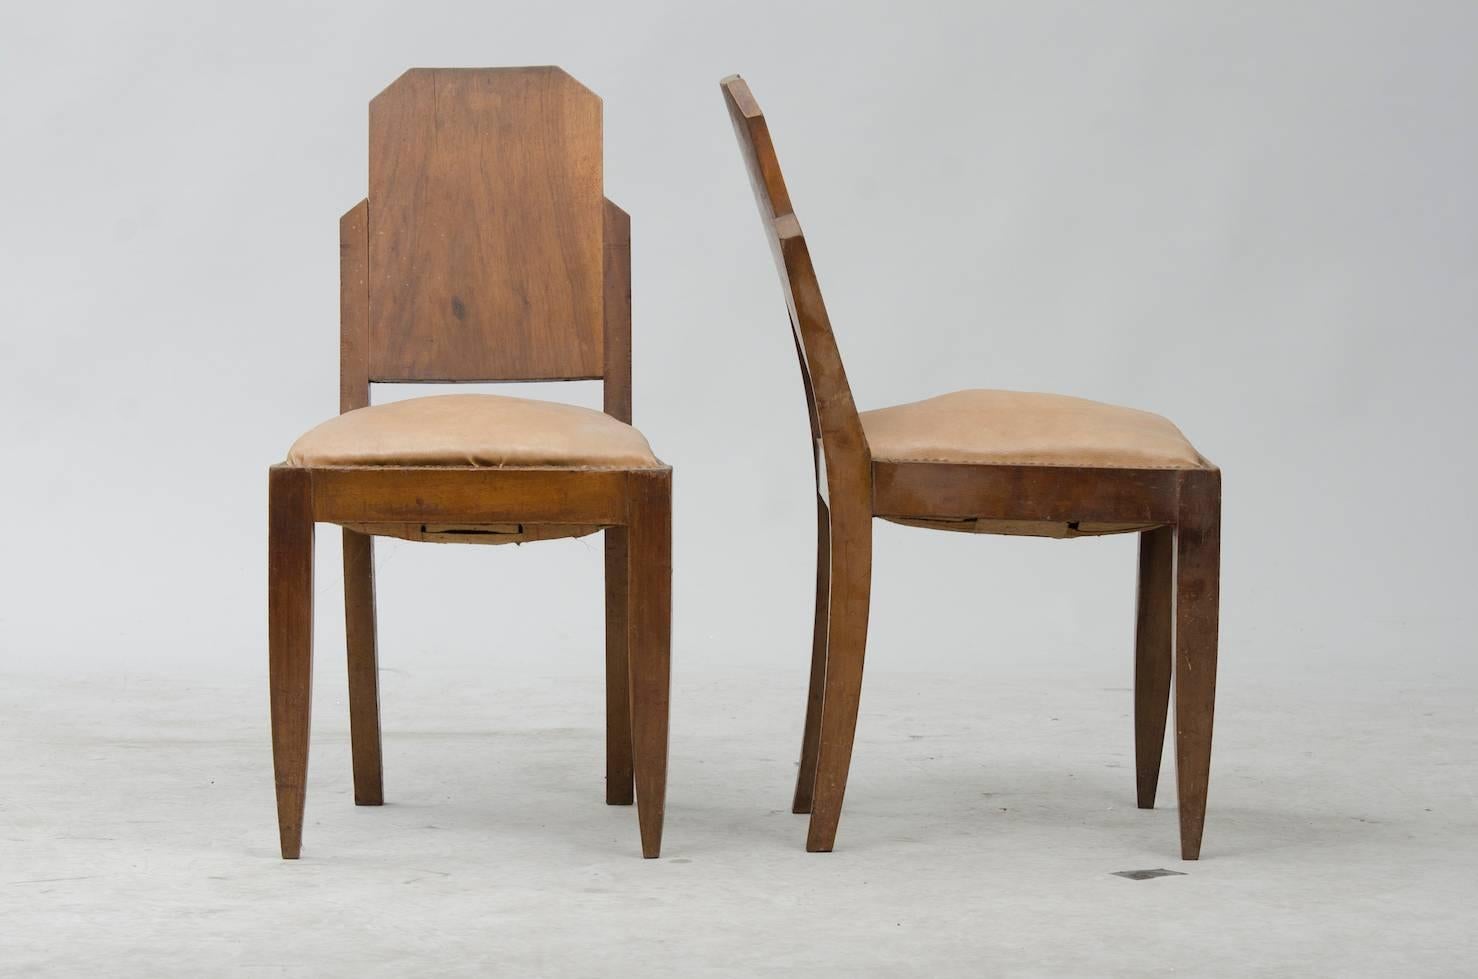 Set of four walnut Art Deco dining chairs.
Price fully restored: 3000€
The price shown is in the original condition.
 